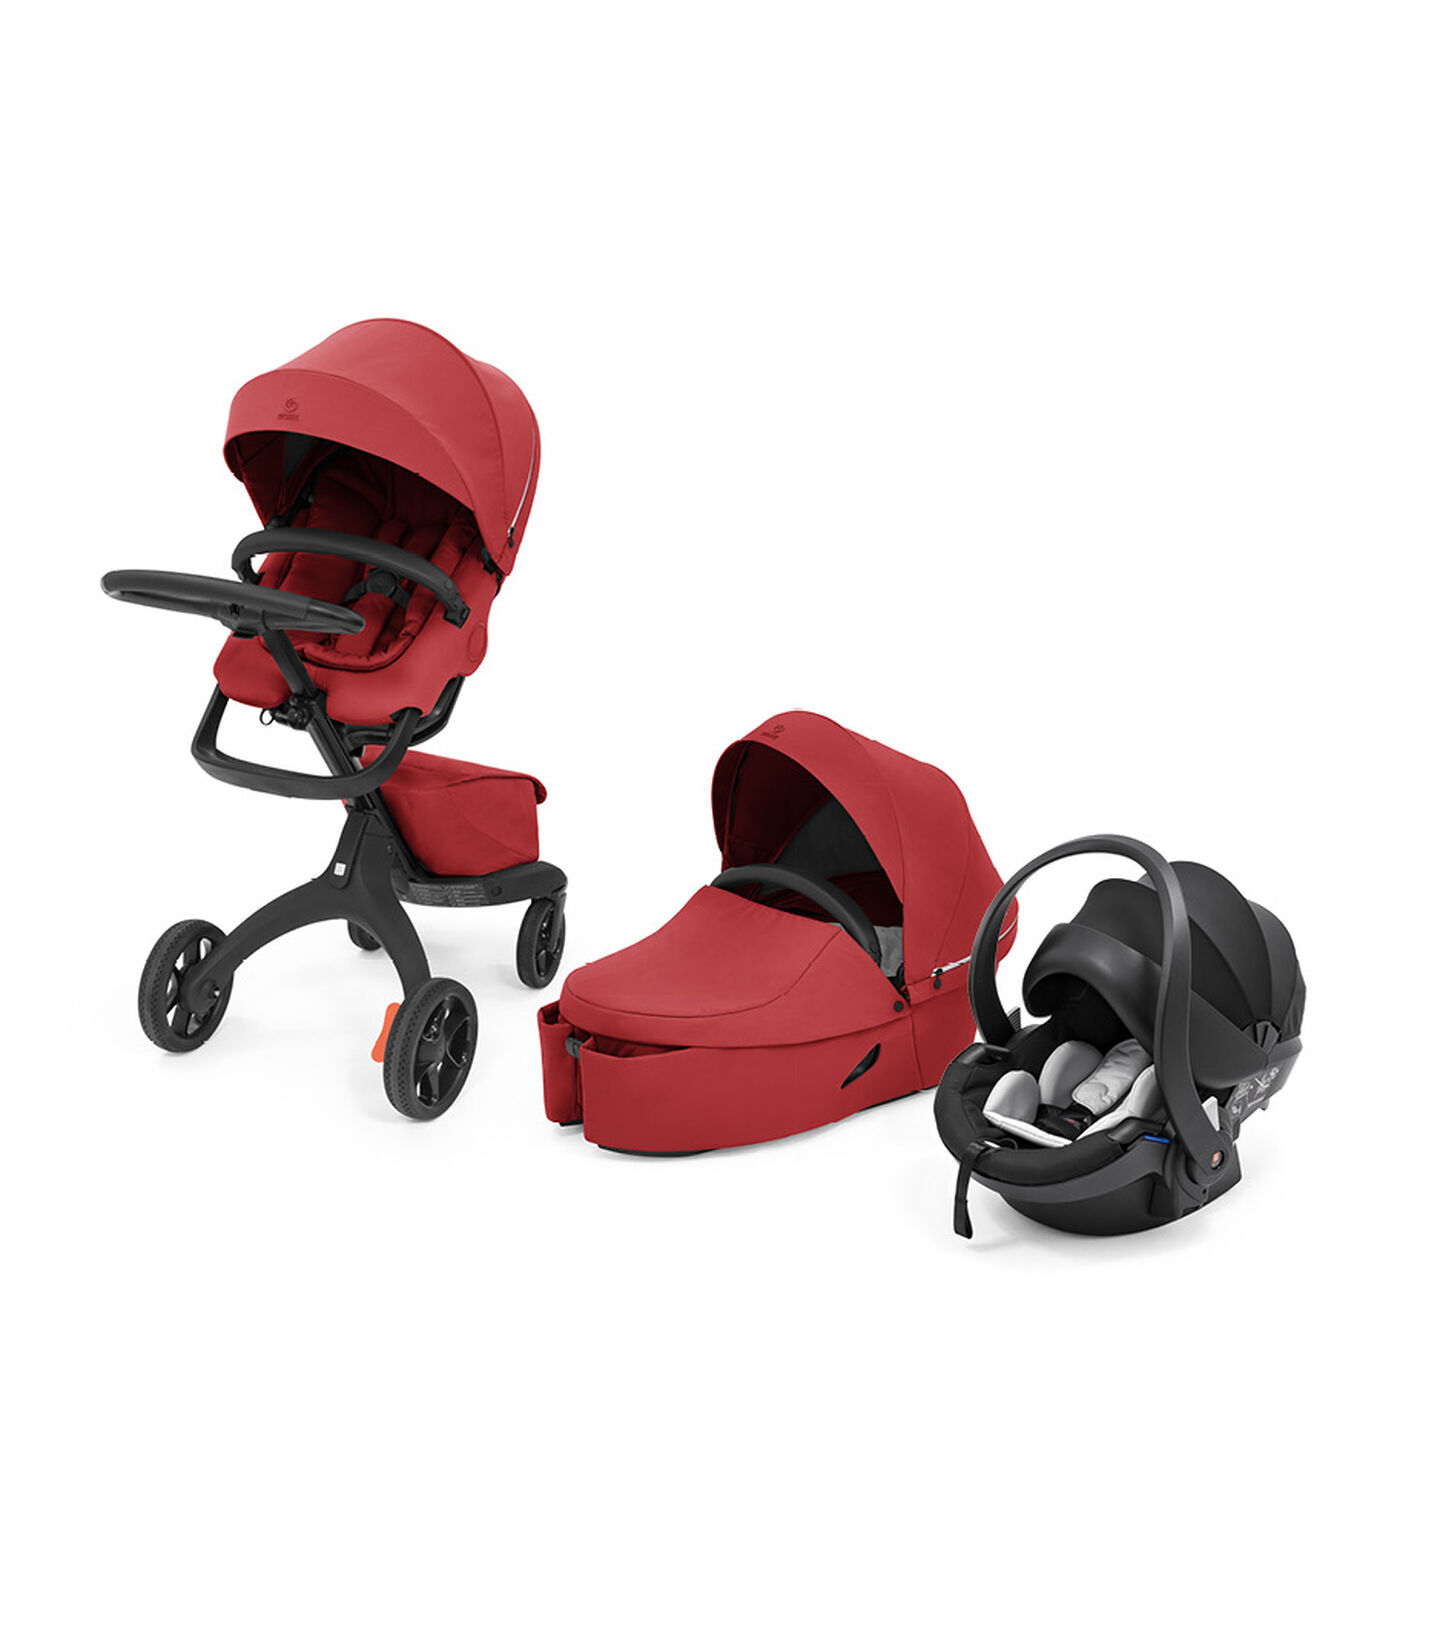 Stokke® Xplory® X Rouge Rubis, Rouge Rubis, mainview view 8